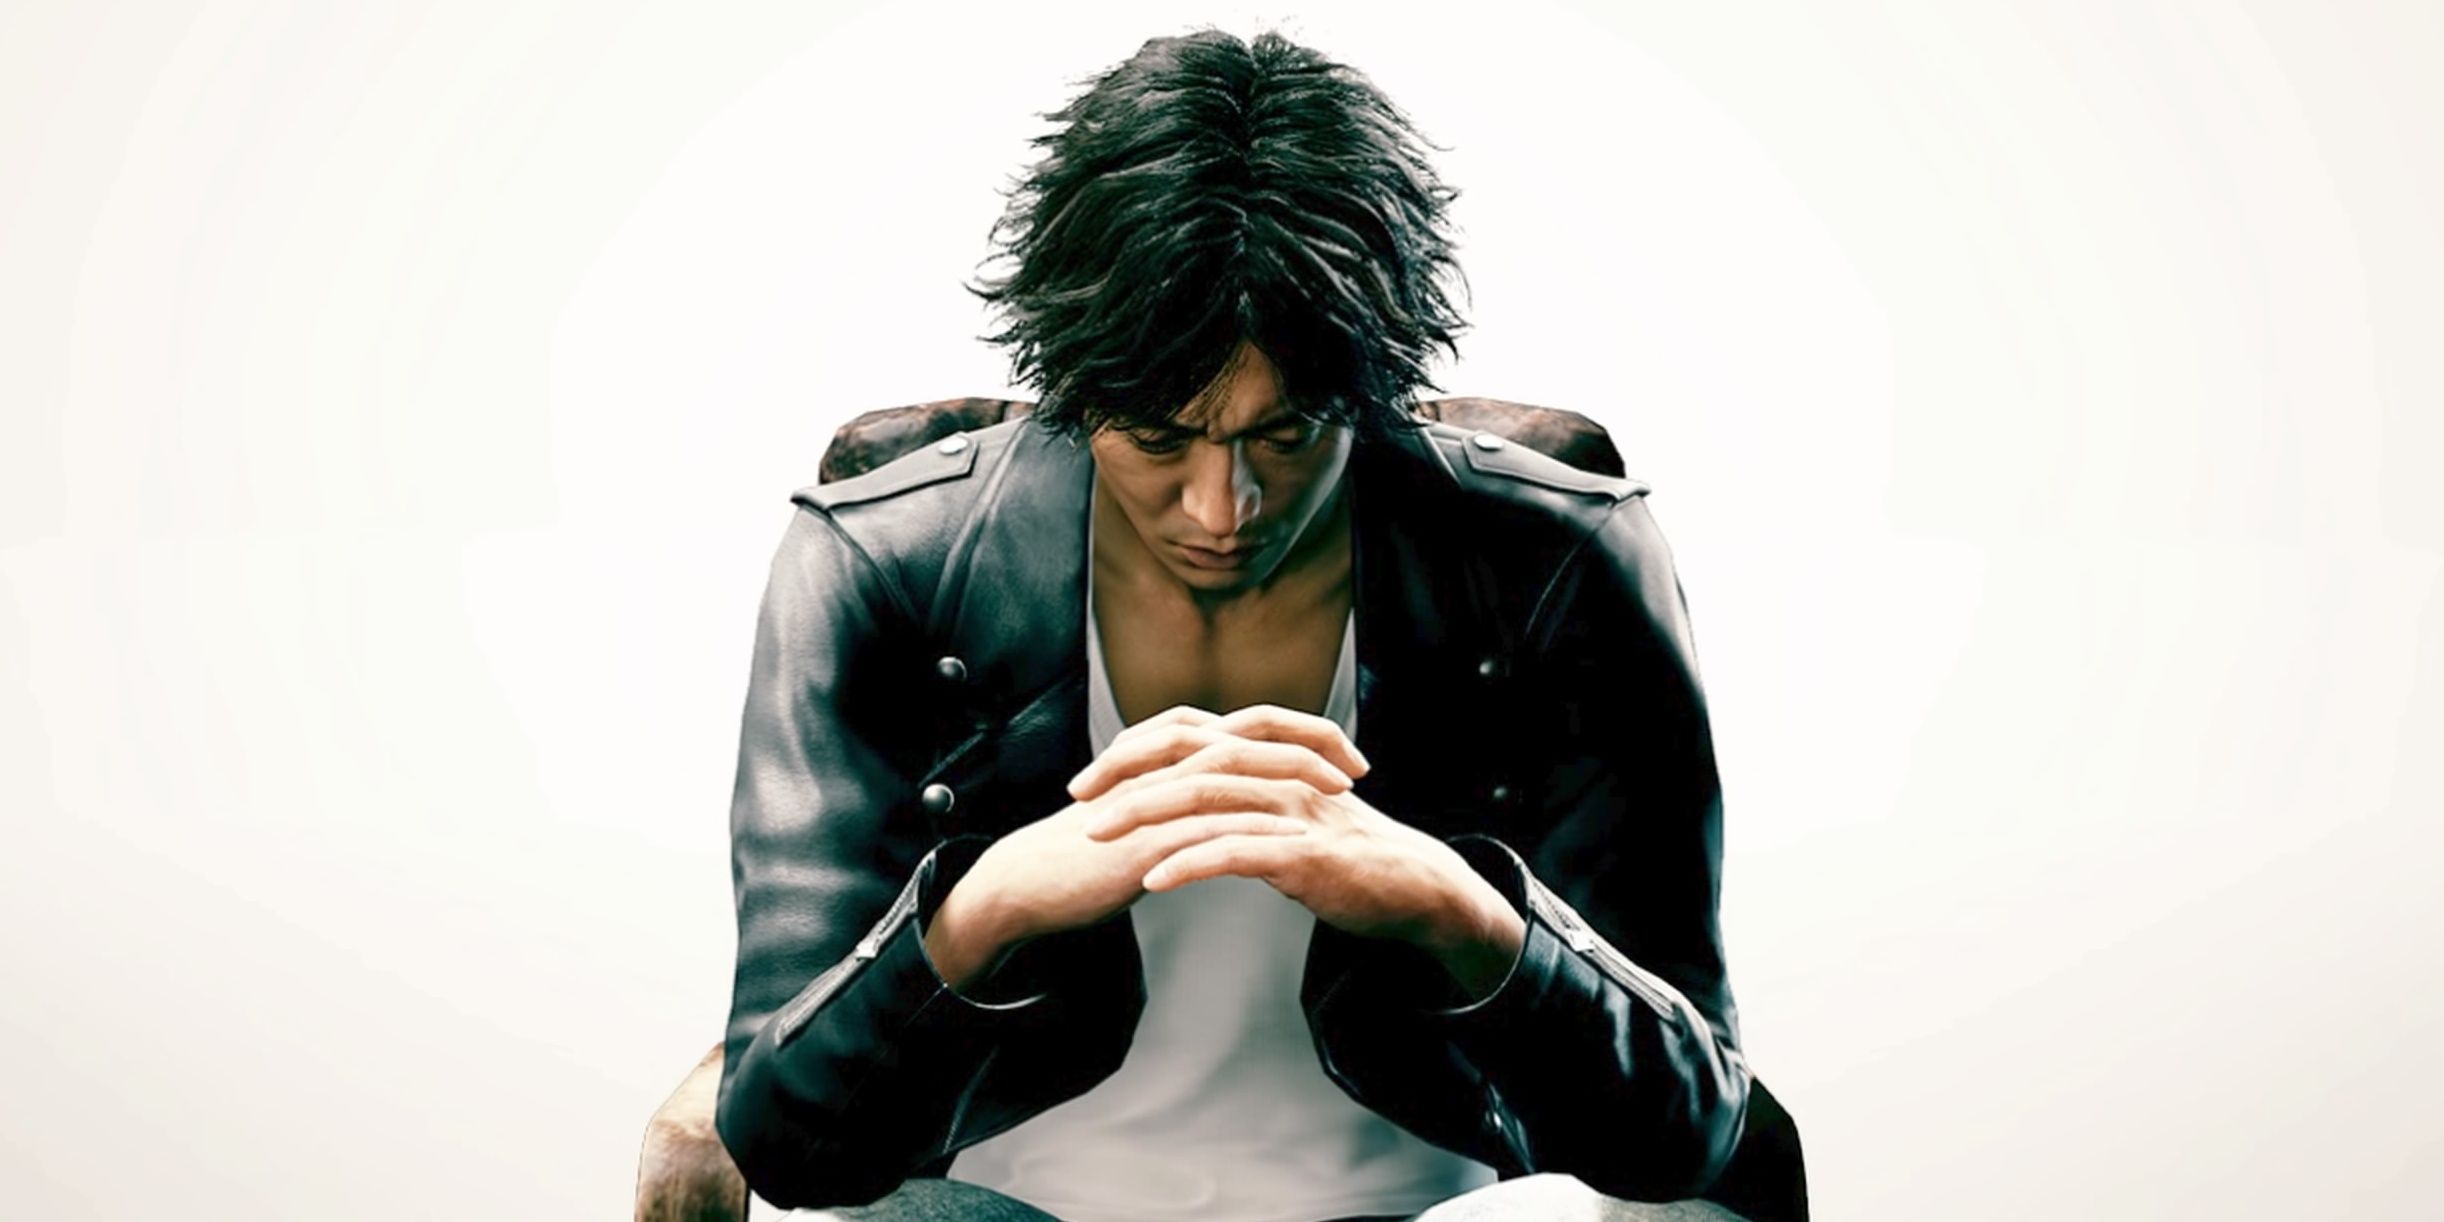 Judgment Promotional Material